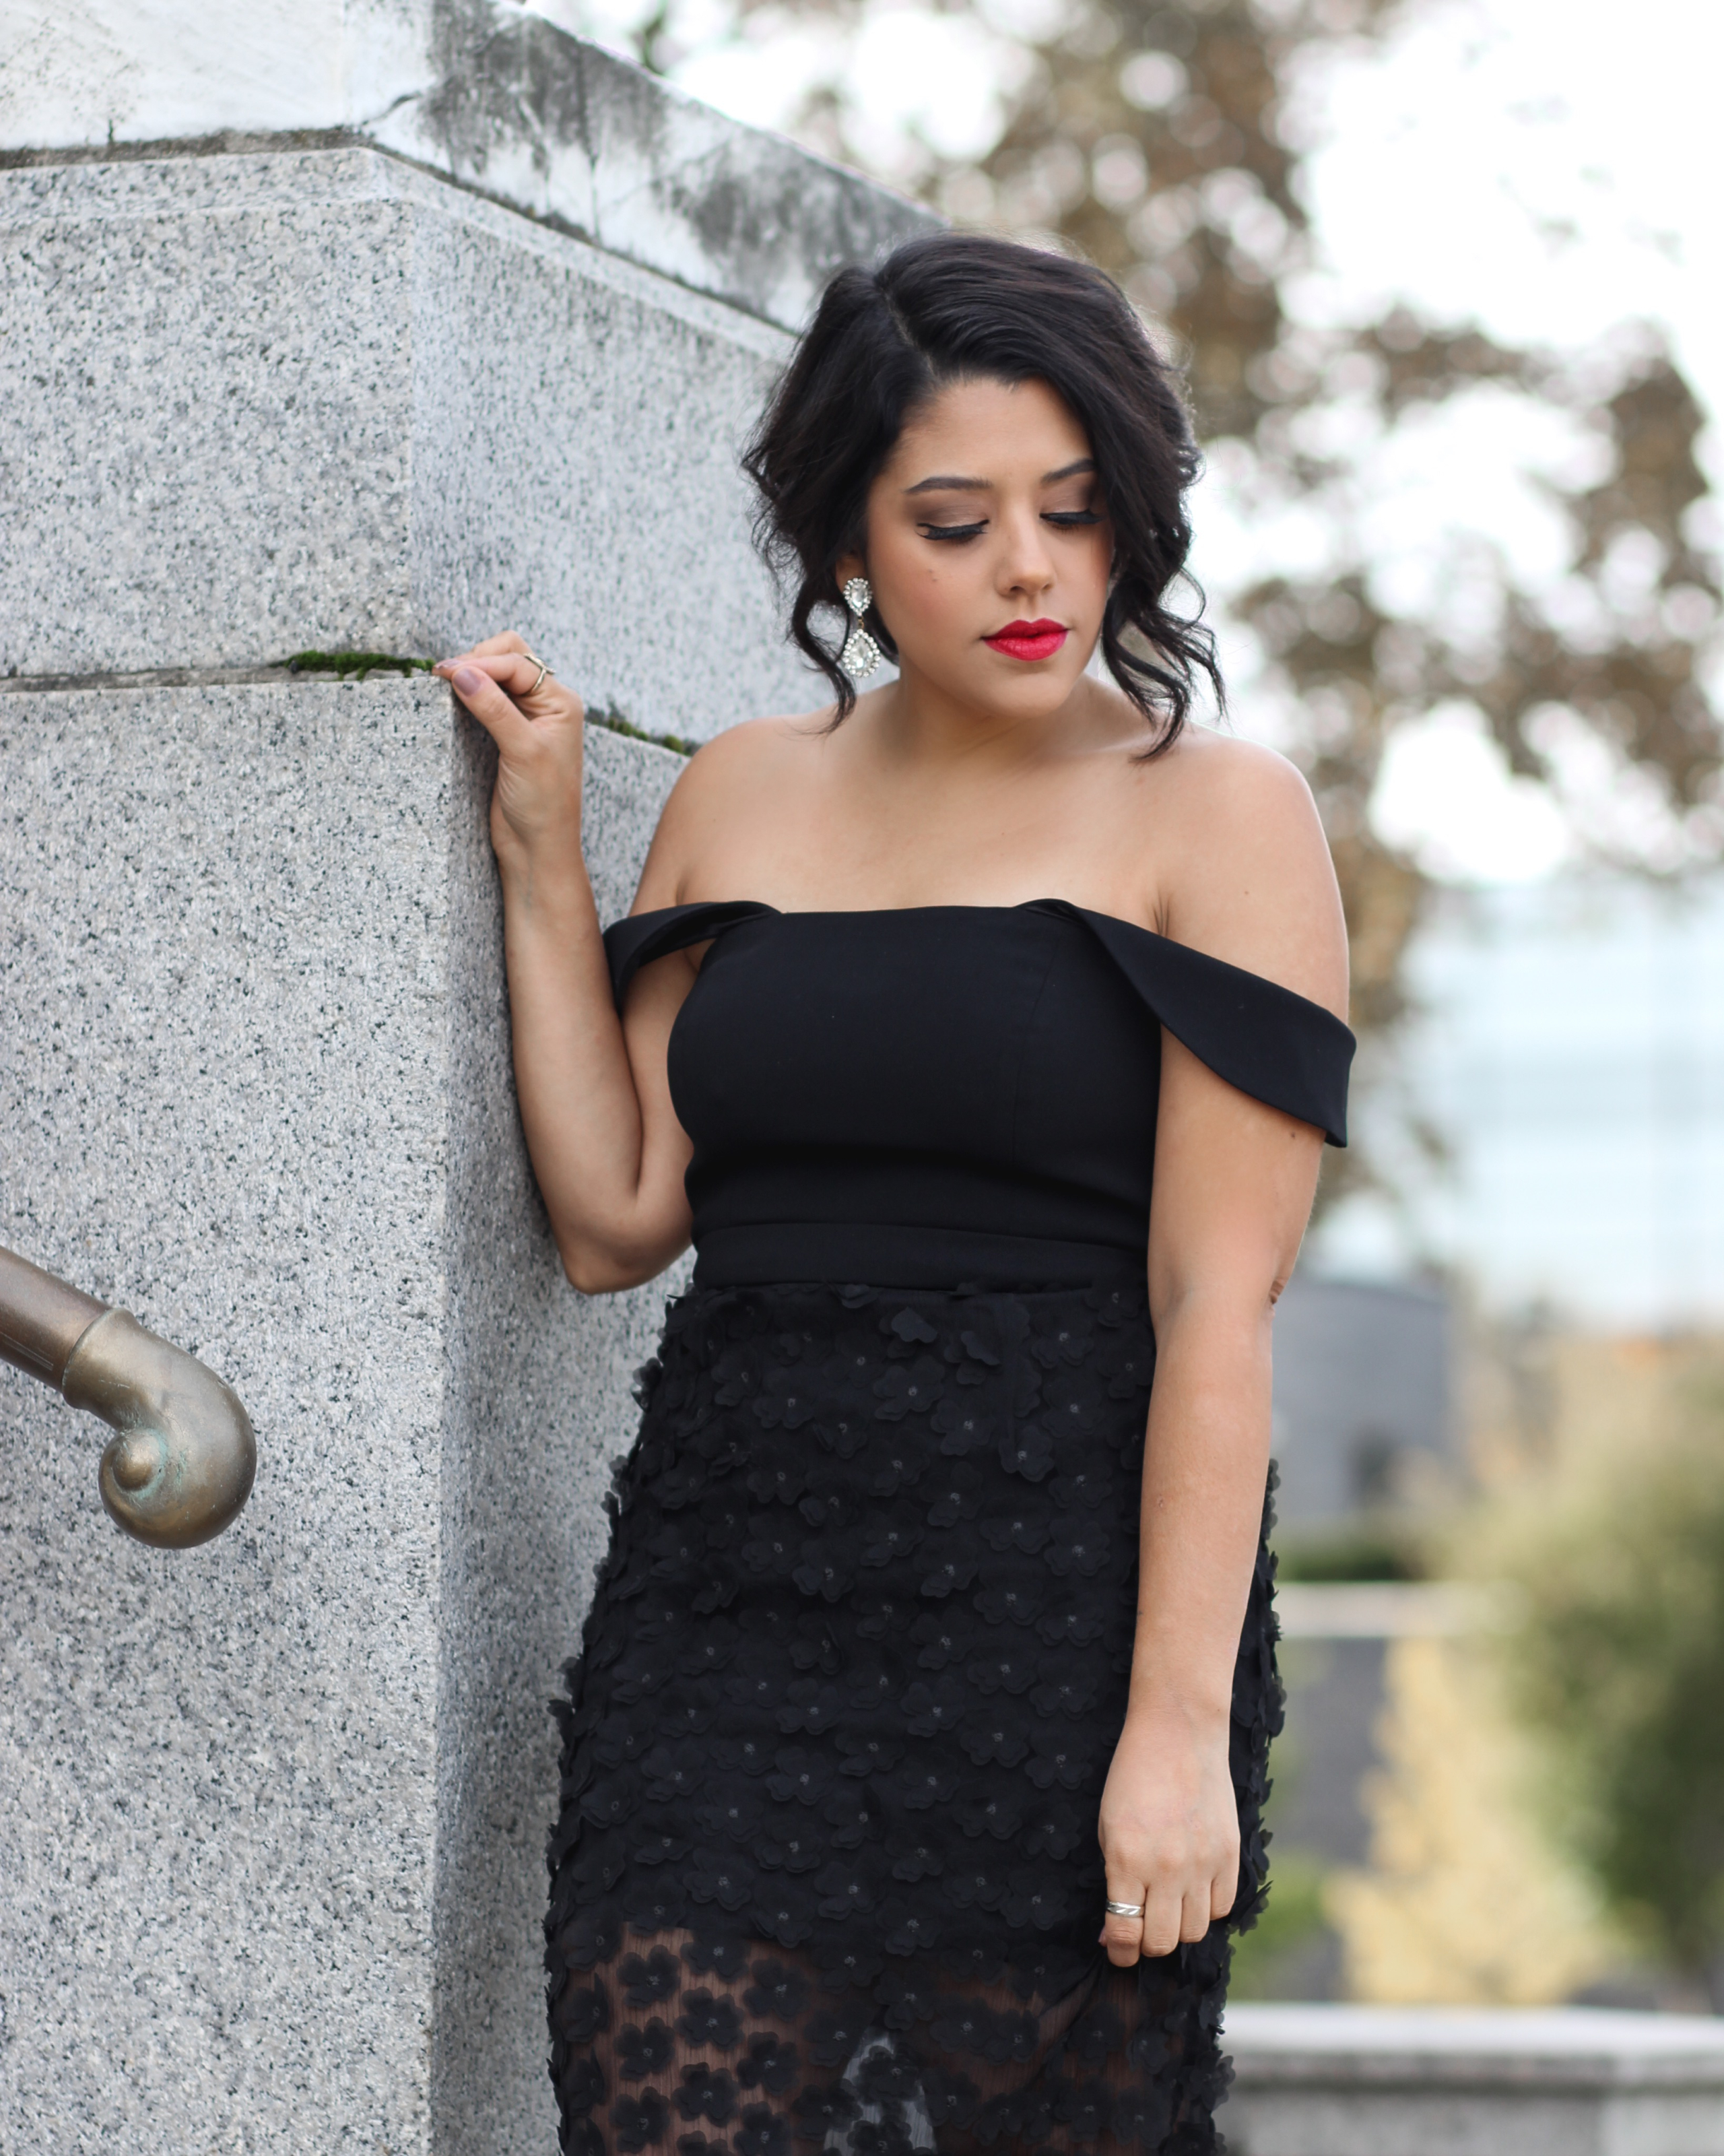 lifestyle blogger naty michele birthday wearing black evening gown